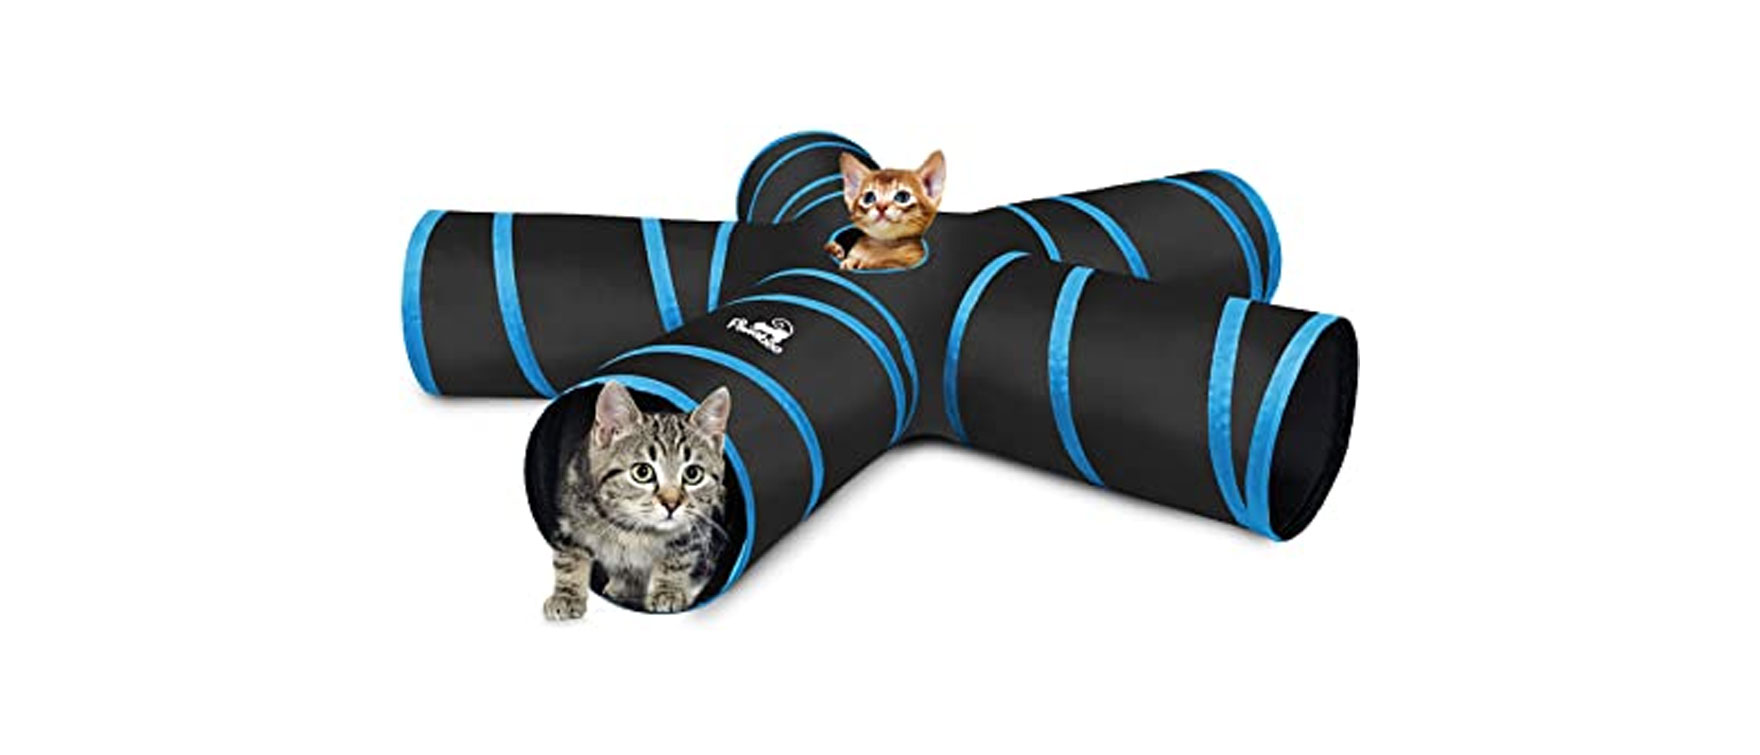 9. Pawaboo cat tunnel tube collapsible play tent